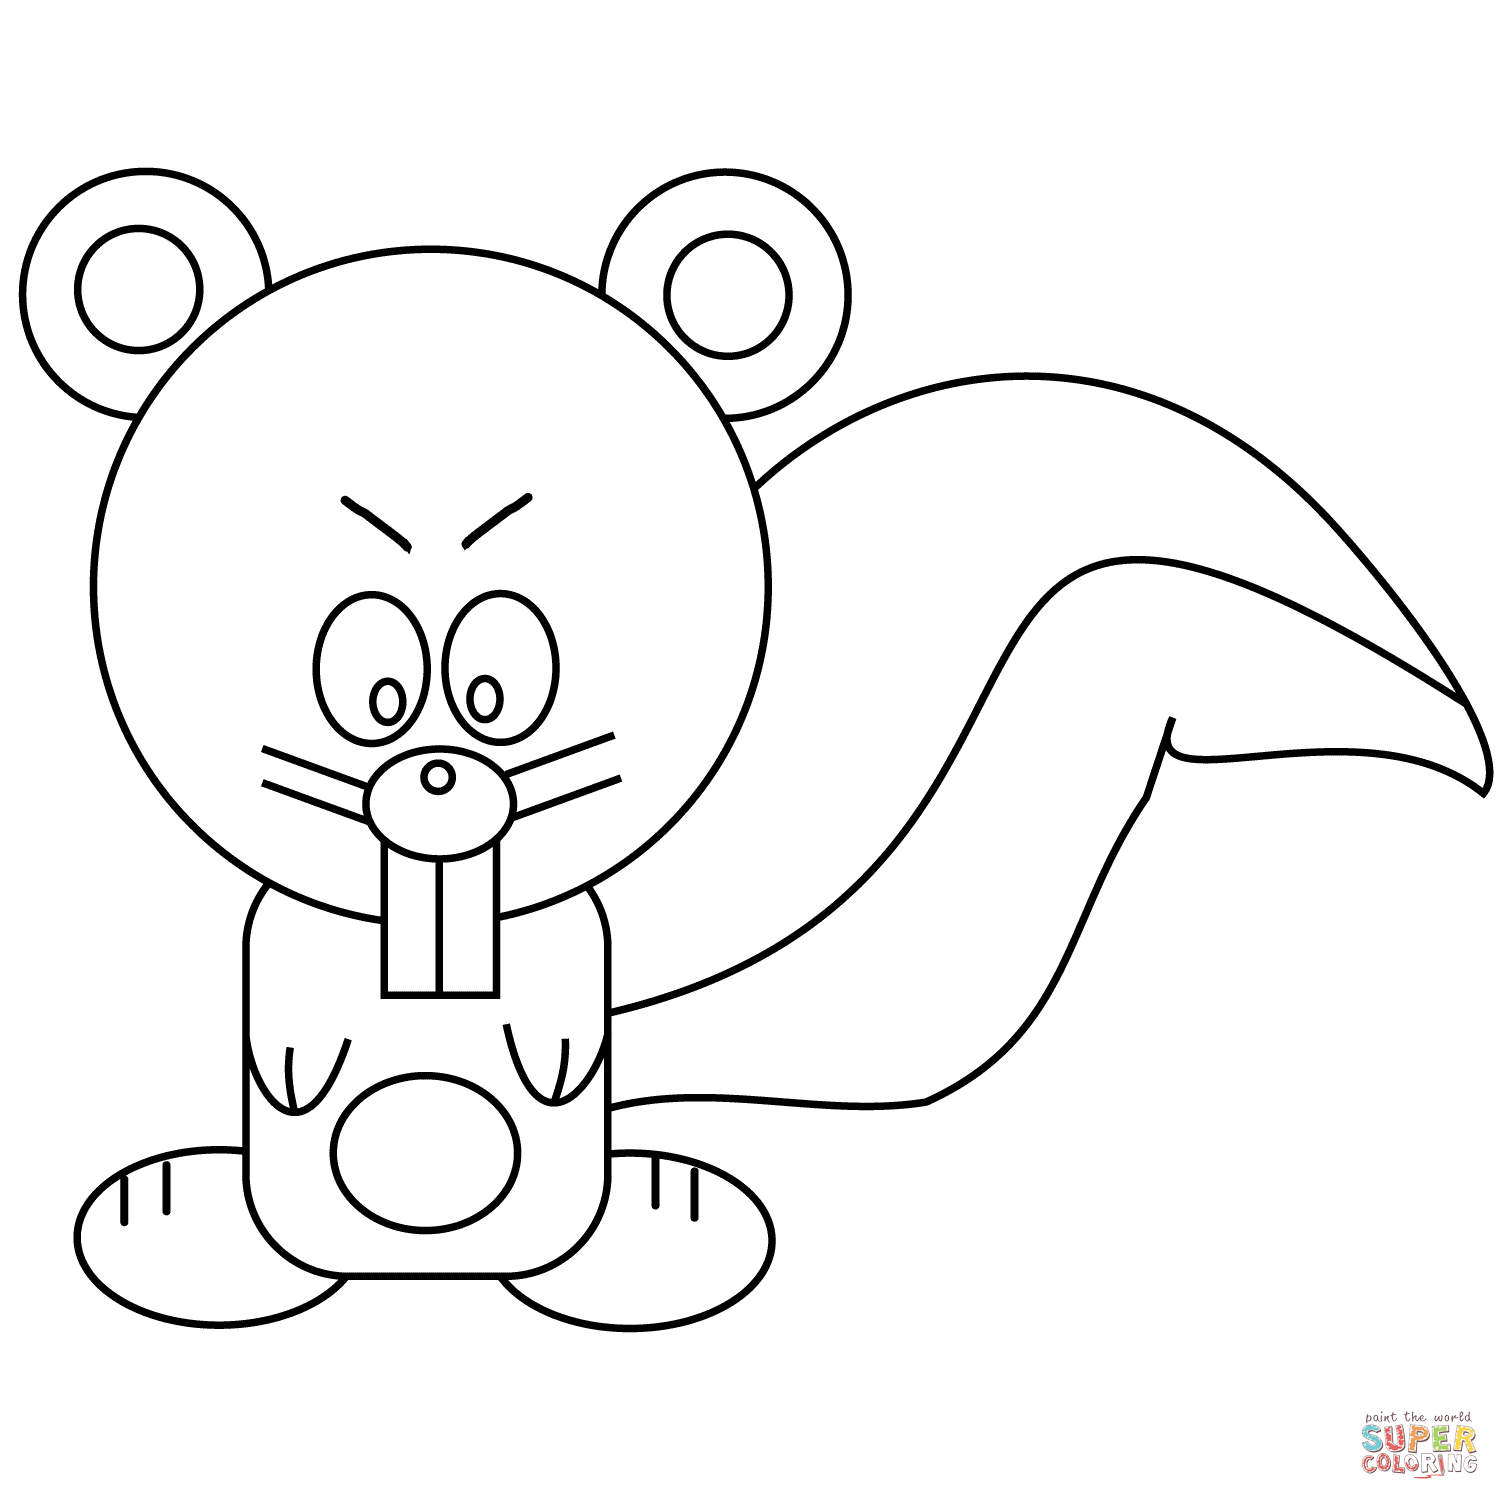 Cartoon Squirrel coloring page | Free Printable Coloring Pages